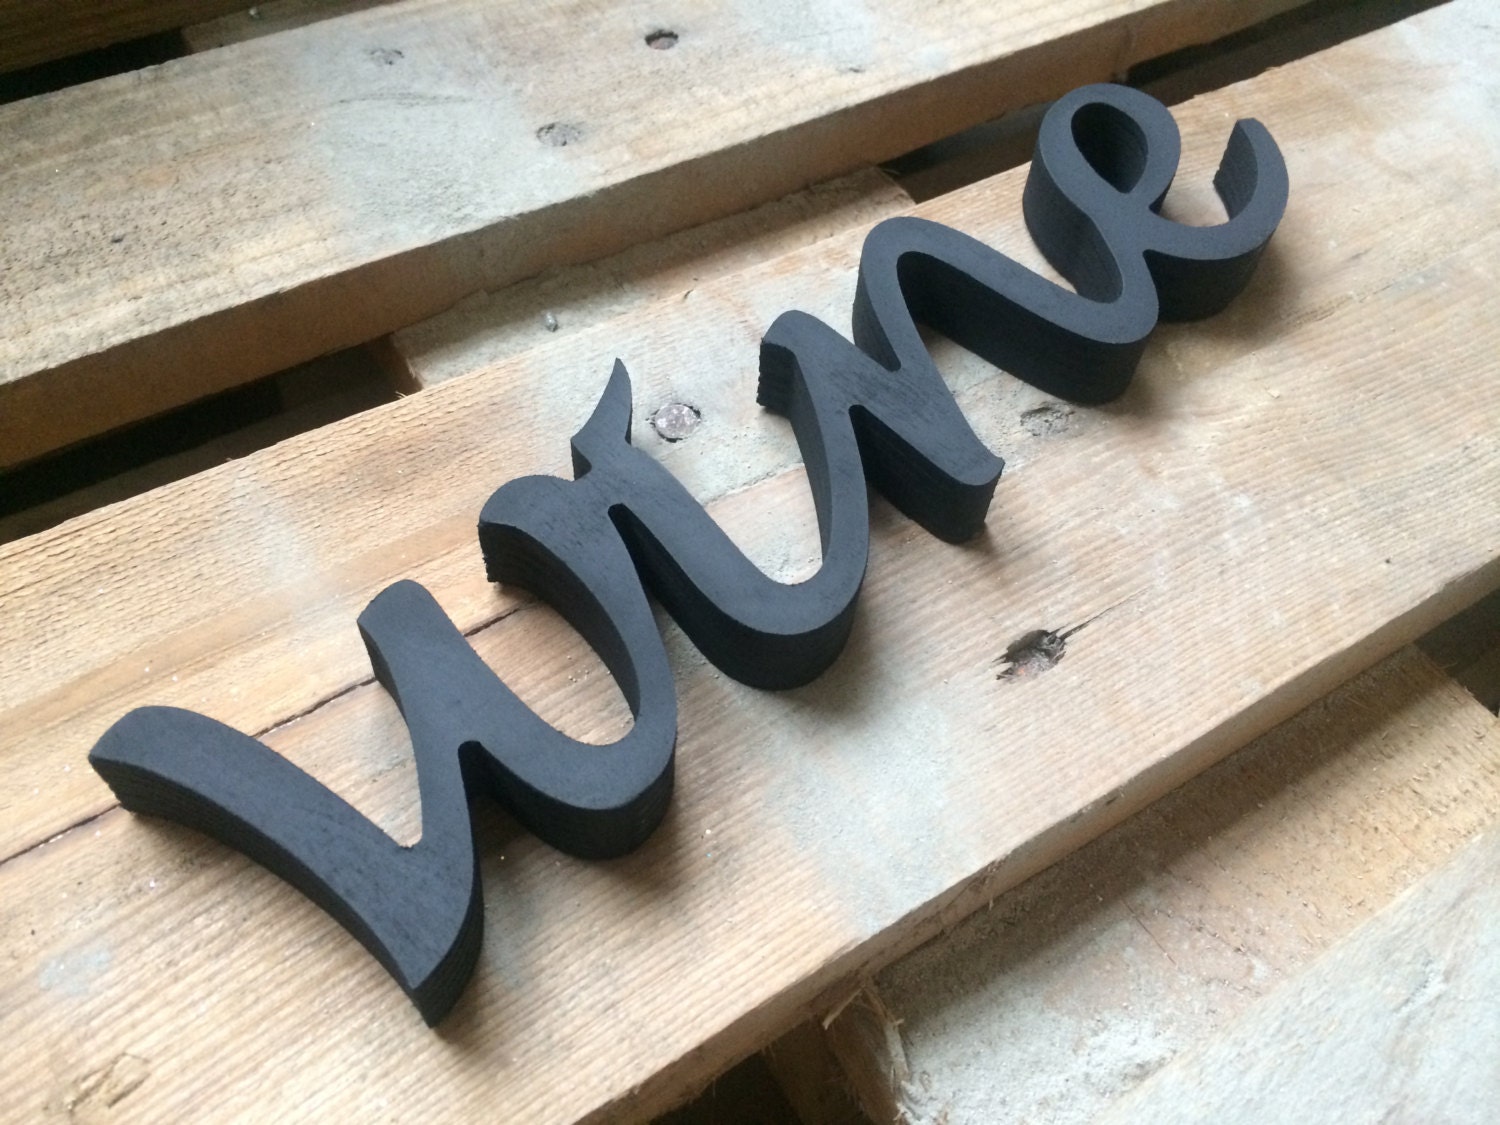  Drawing Sketch Of Wooden Letters With Tacks for Adult